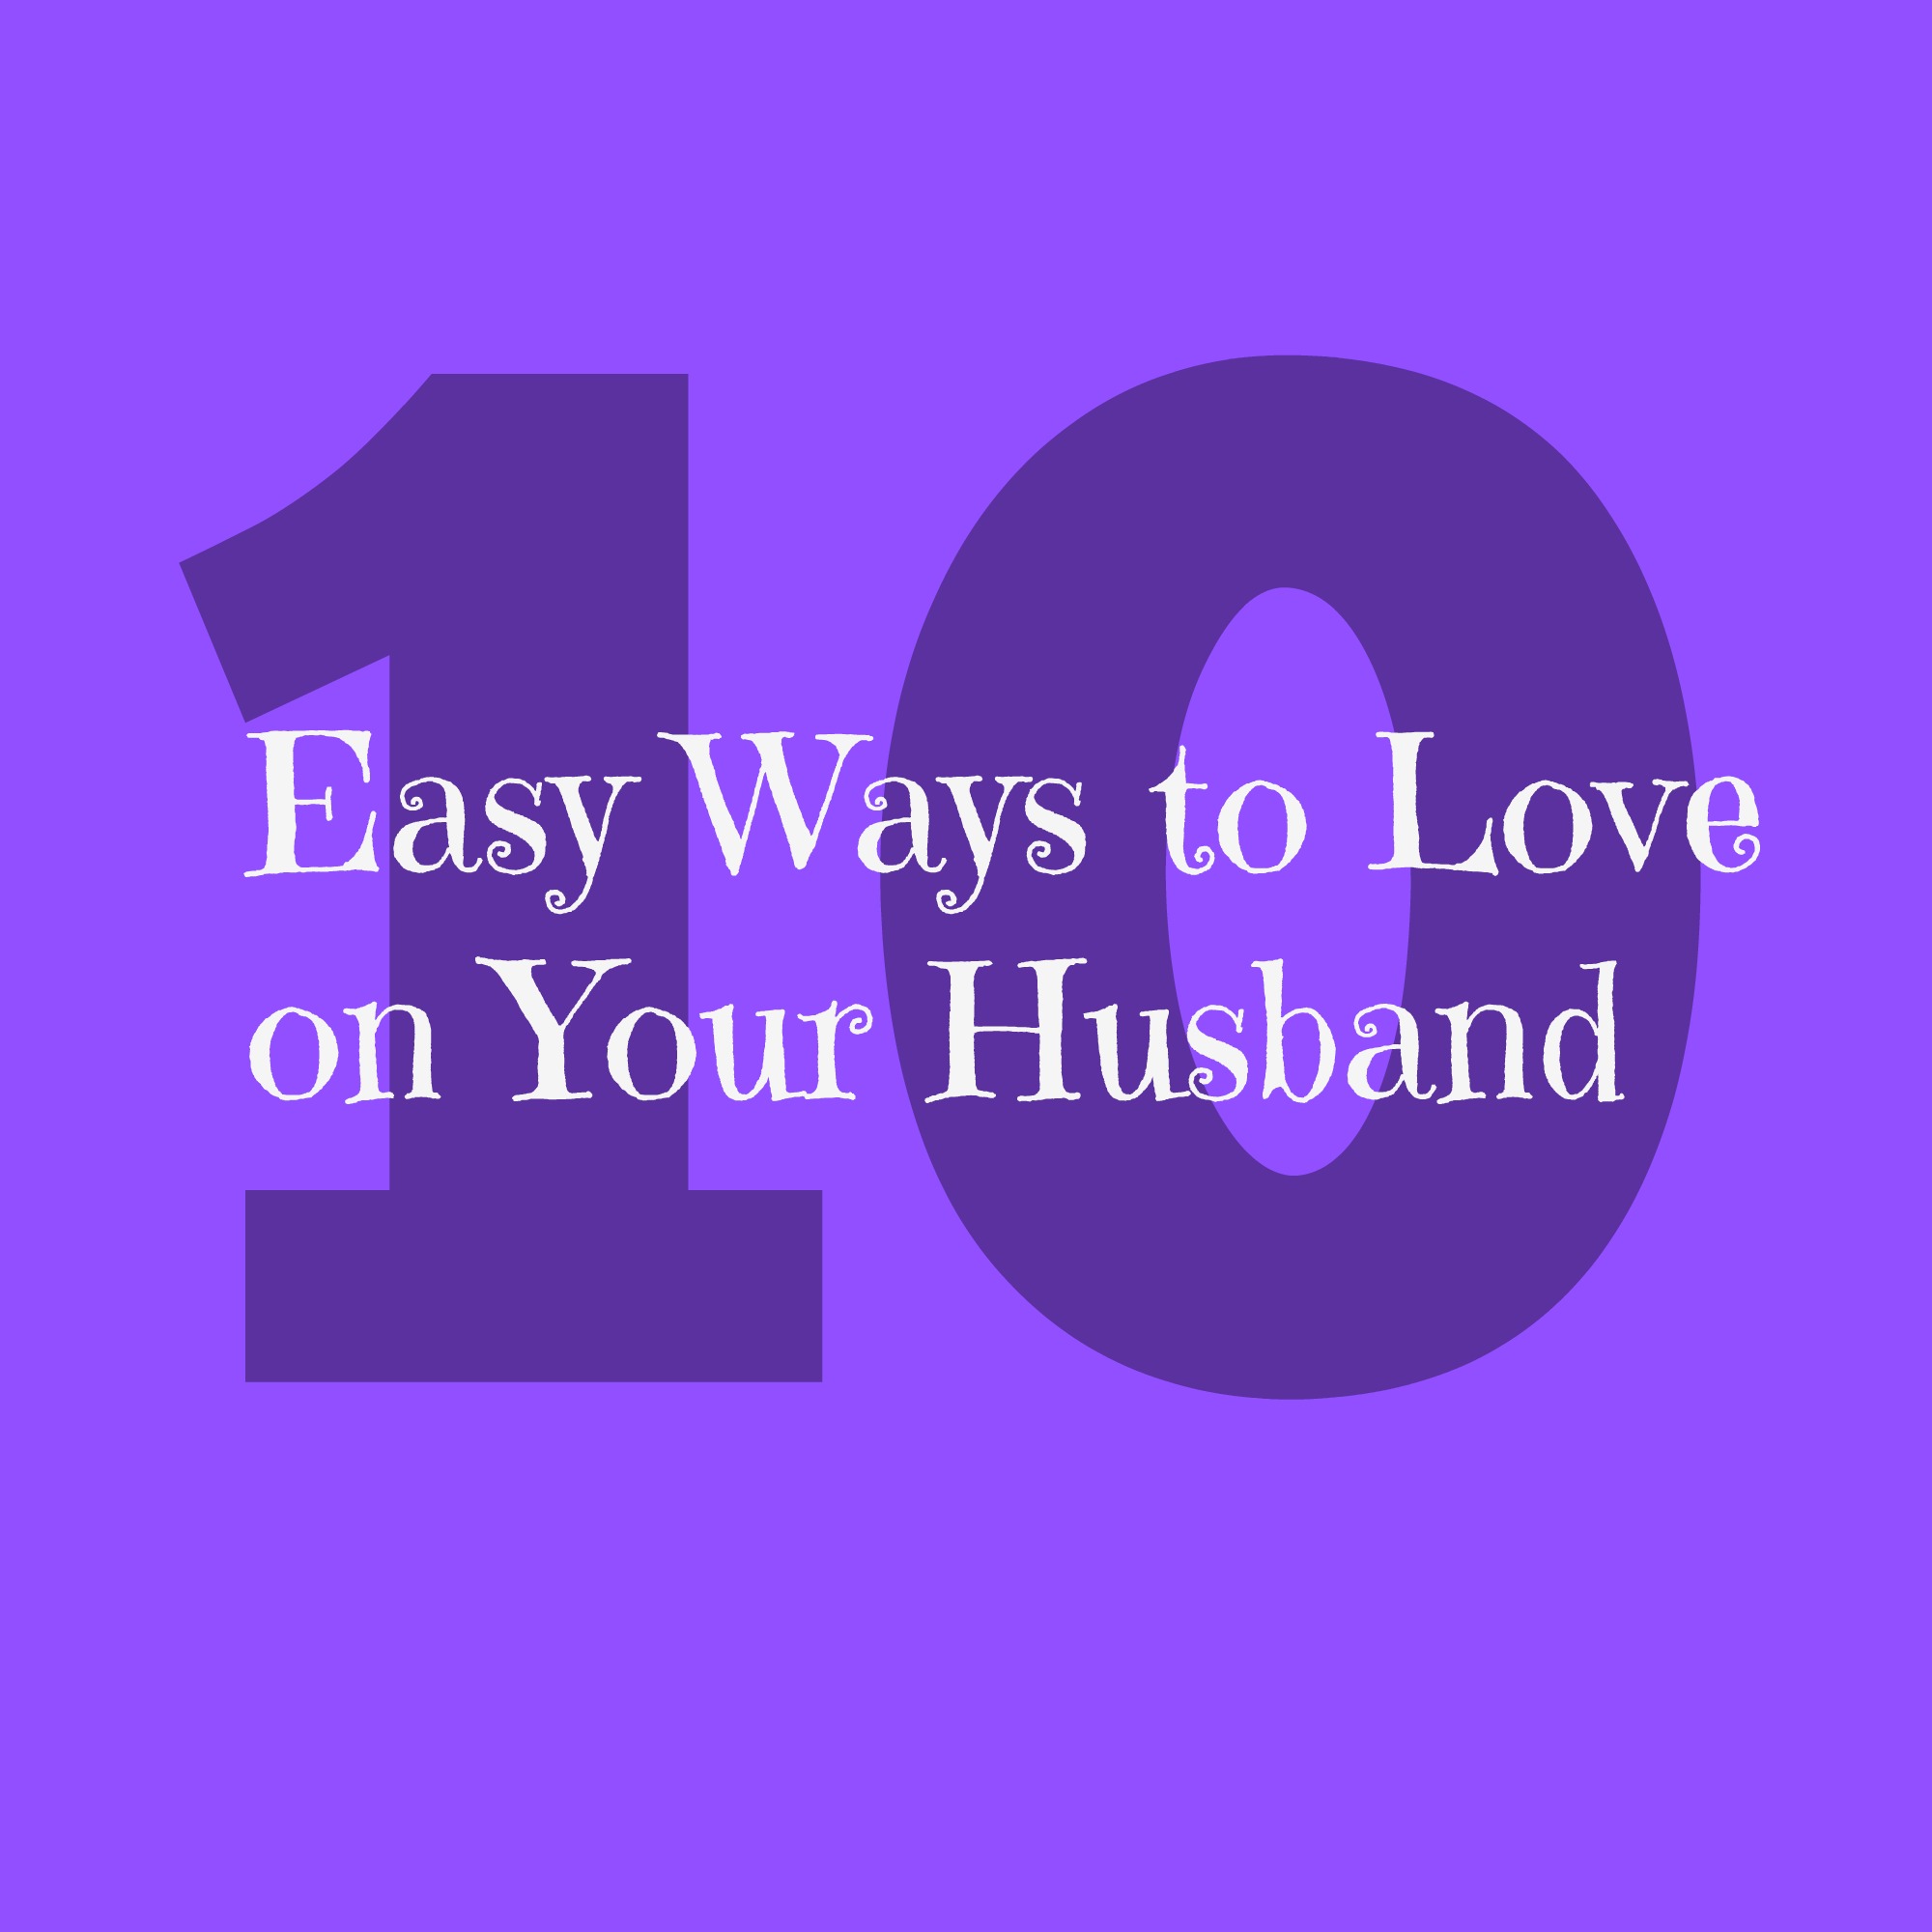 10 Easy Ways to Love on Your Husband